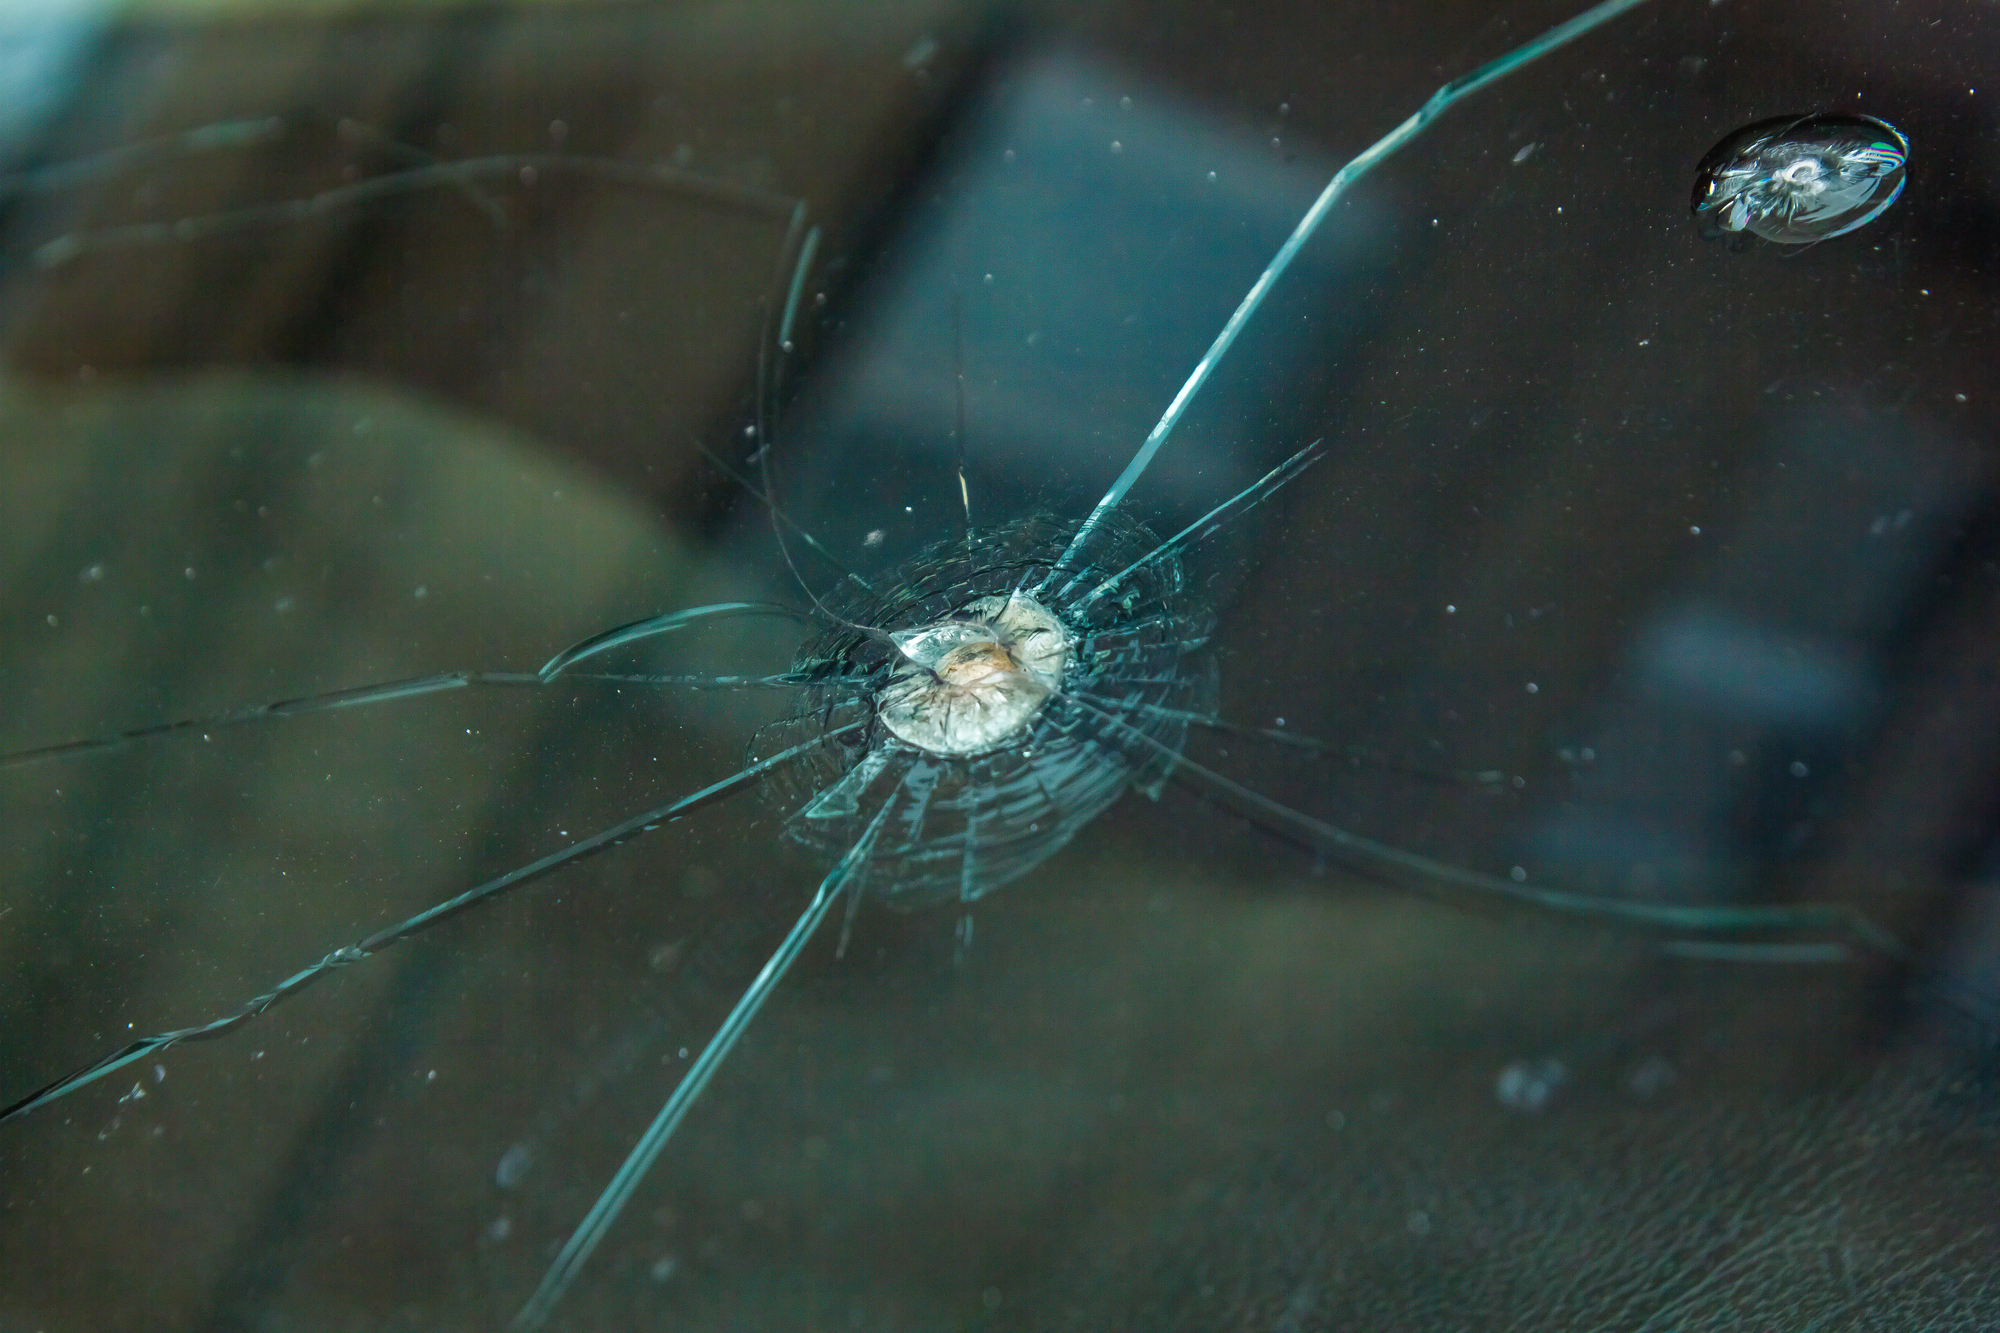 Picture of cracked windshield caused by stone chip